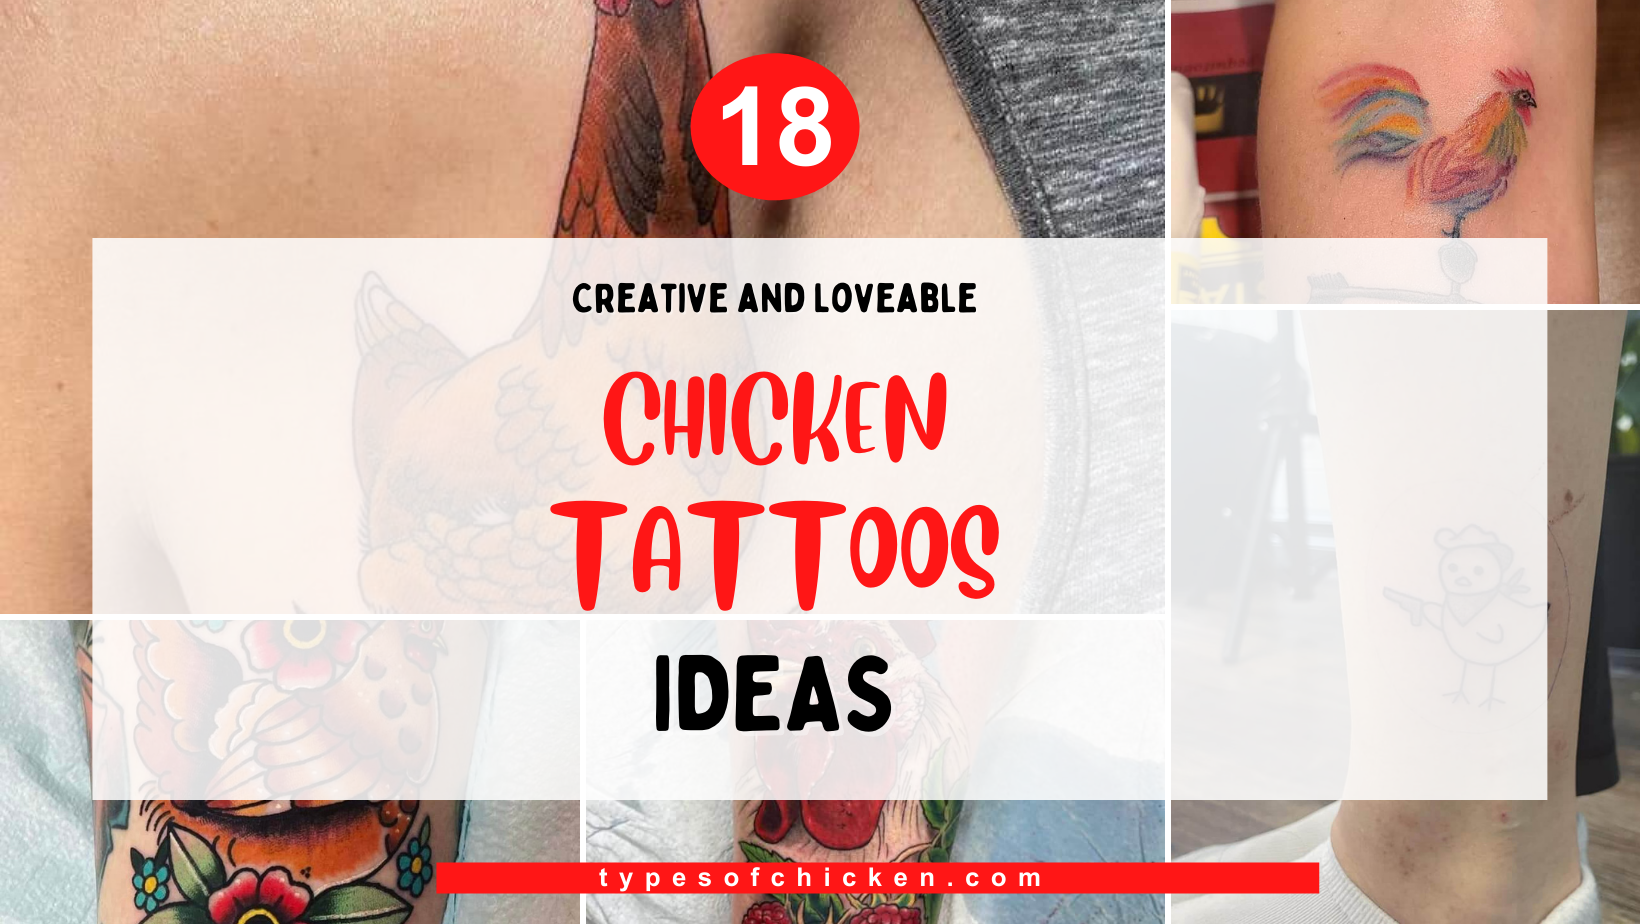 18 Creative and Loveable Chicken Tattoo Ideas That You Don’t Wanna Miss